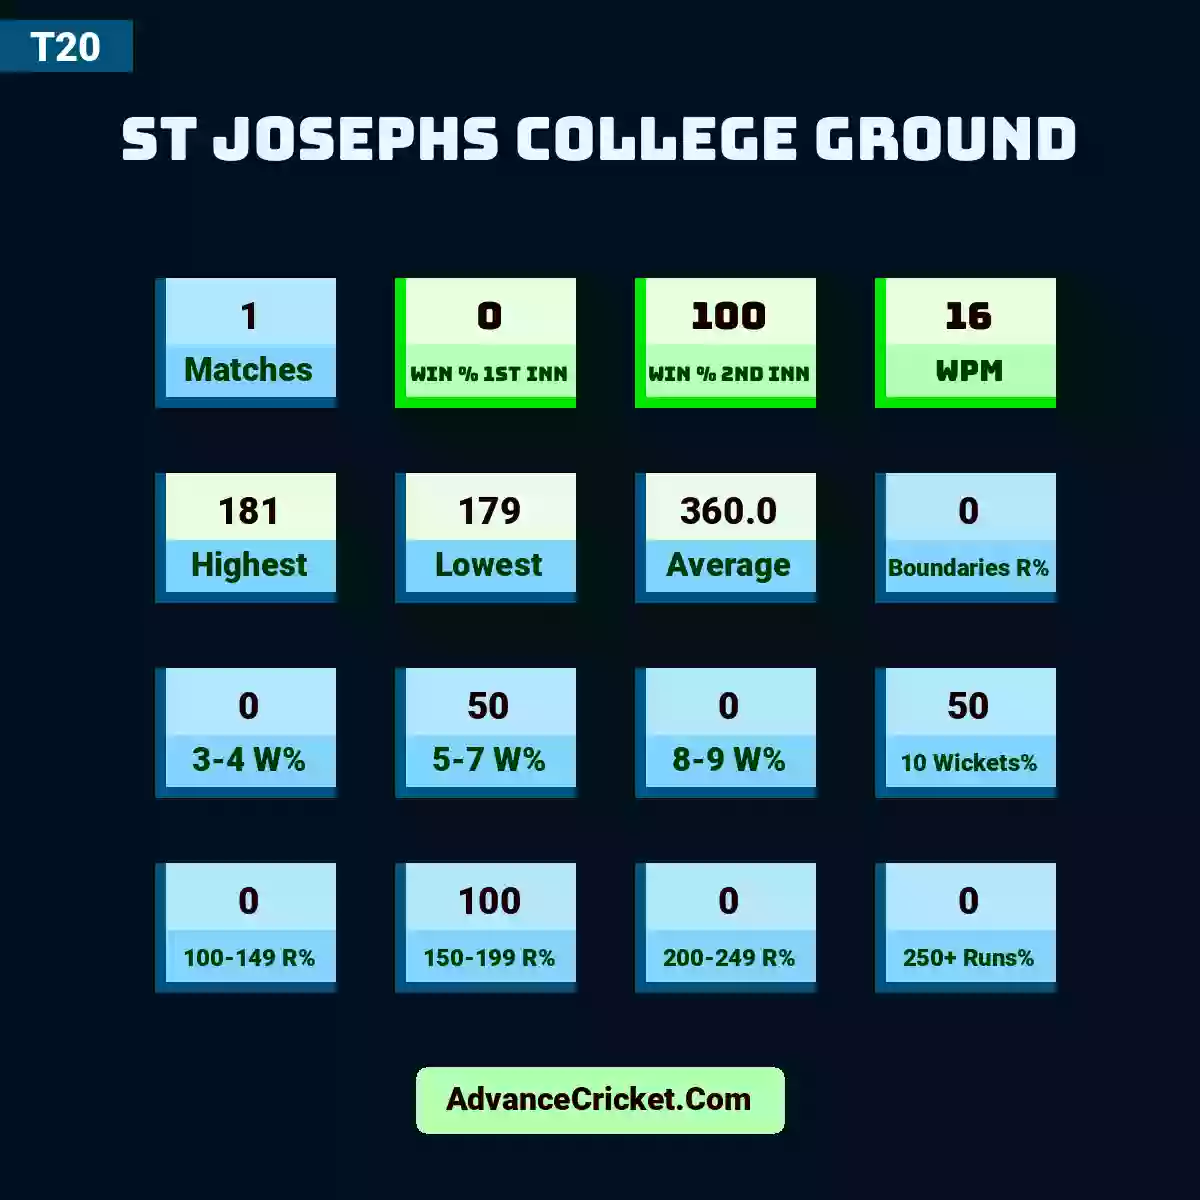 Image showing st josephs college ground with Matches: 1, Win % 1st Inn: 0, Win % 2nd Inn: 100, WPM: 16, Highest: 181, Lowest: 179, Average: 360.0, Boundaries R%: 0, 3-4 W%: 0, 5-7 W%: 50, 8-9 W%: 0, 10 Wickets%: 50, 100-149 R%: 0, 150-199 R%: 100, 200-249 R%: 0, 250+ Runs%: 0.